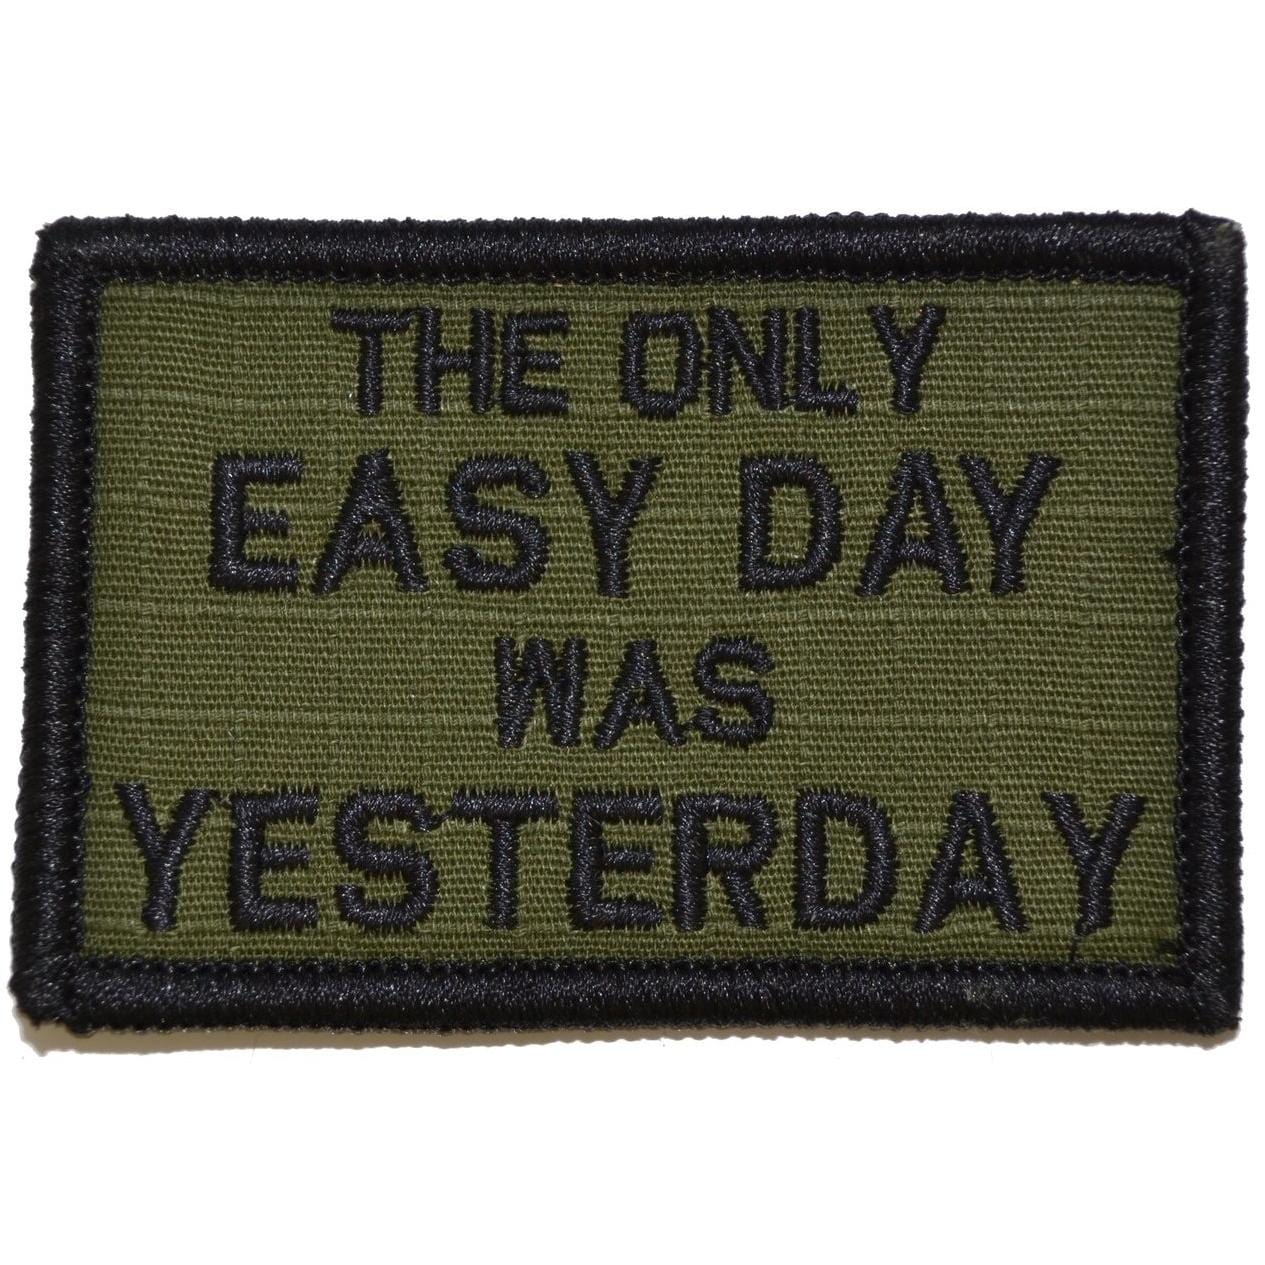 Tactical Gear Junkie Patches Olive Drab The Only Easy Day Was Yesterday, Navy Seal Motto - 2x3 Patch